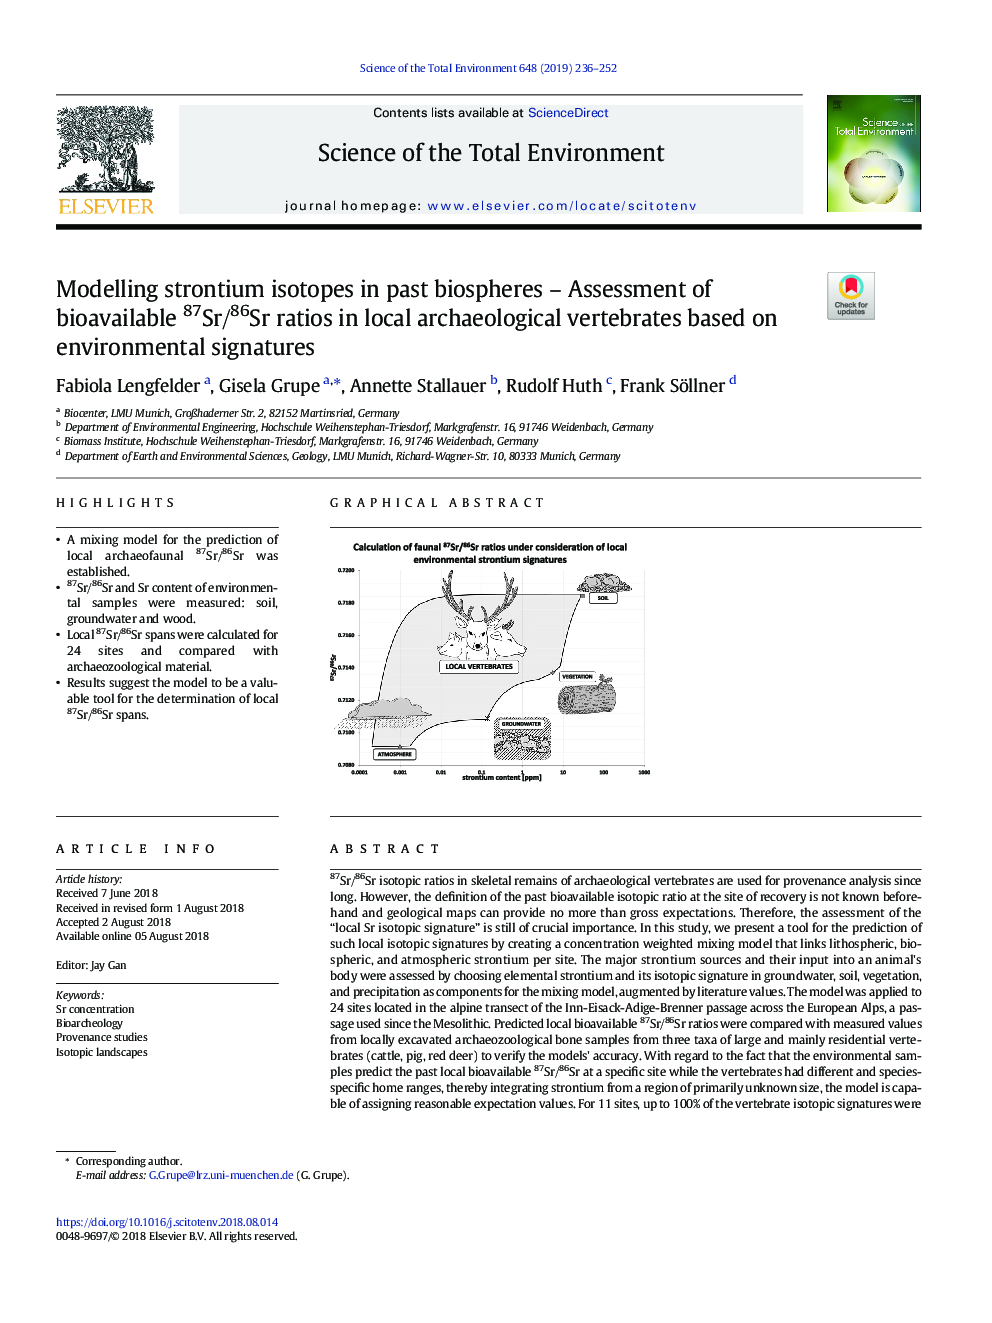 Modelling strontium isotopes in past biospheres - Assessment of bioavailable 87Sr/86Sr ratios in local archaeological vertebrates based on environmental signatures